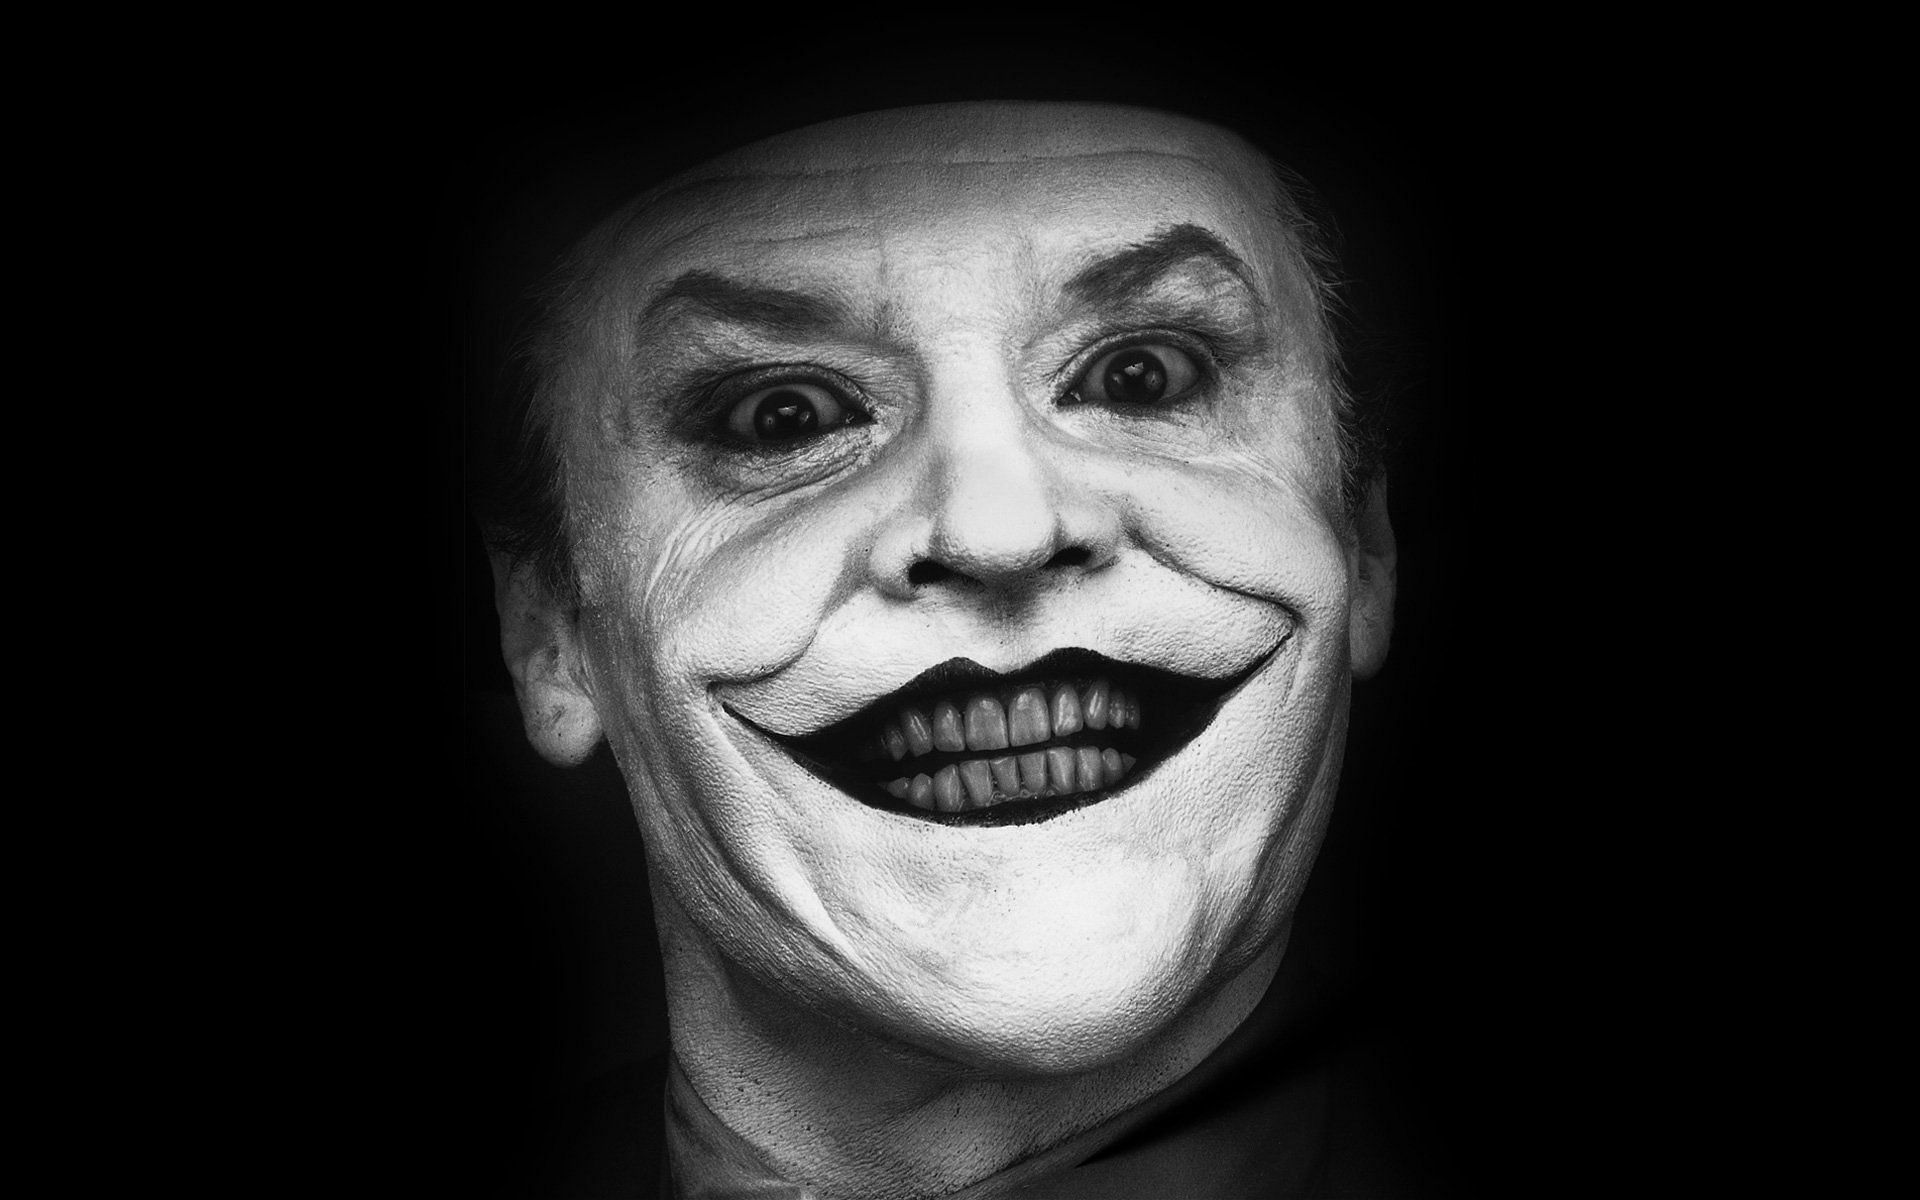 The Grinning Madman: The cultural impact of Jack Nicholson